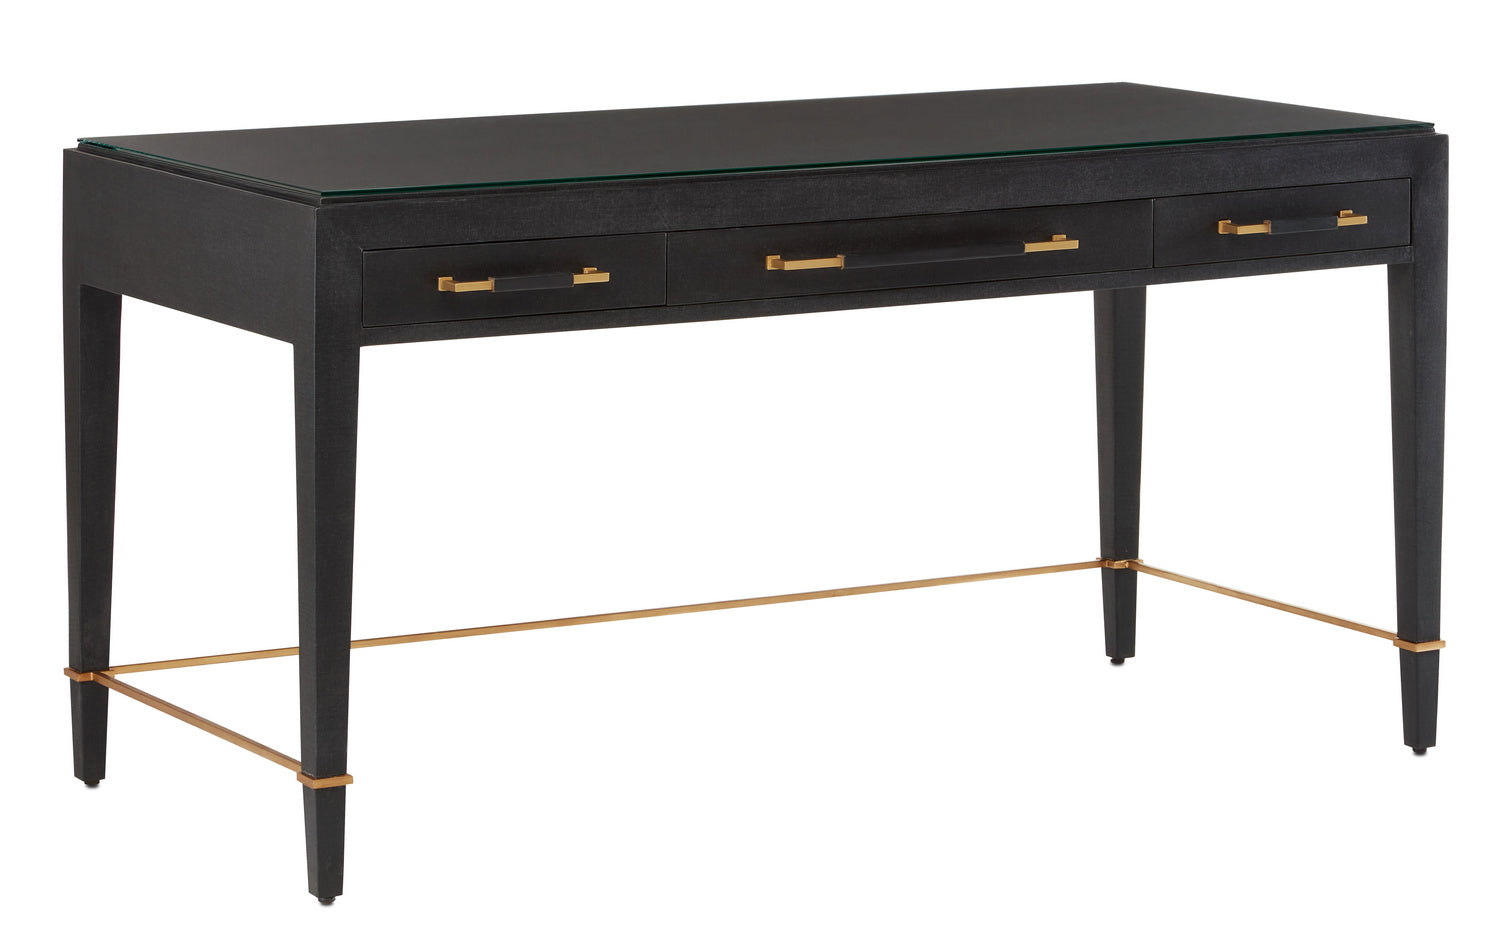 Currey and Company - Desk - Verona - Black Lacquered Linen/Champagne- Union Lighting Luminaires Decor